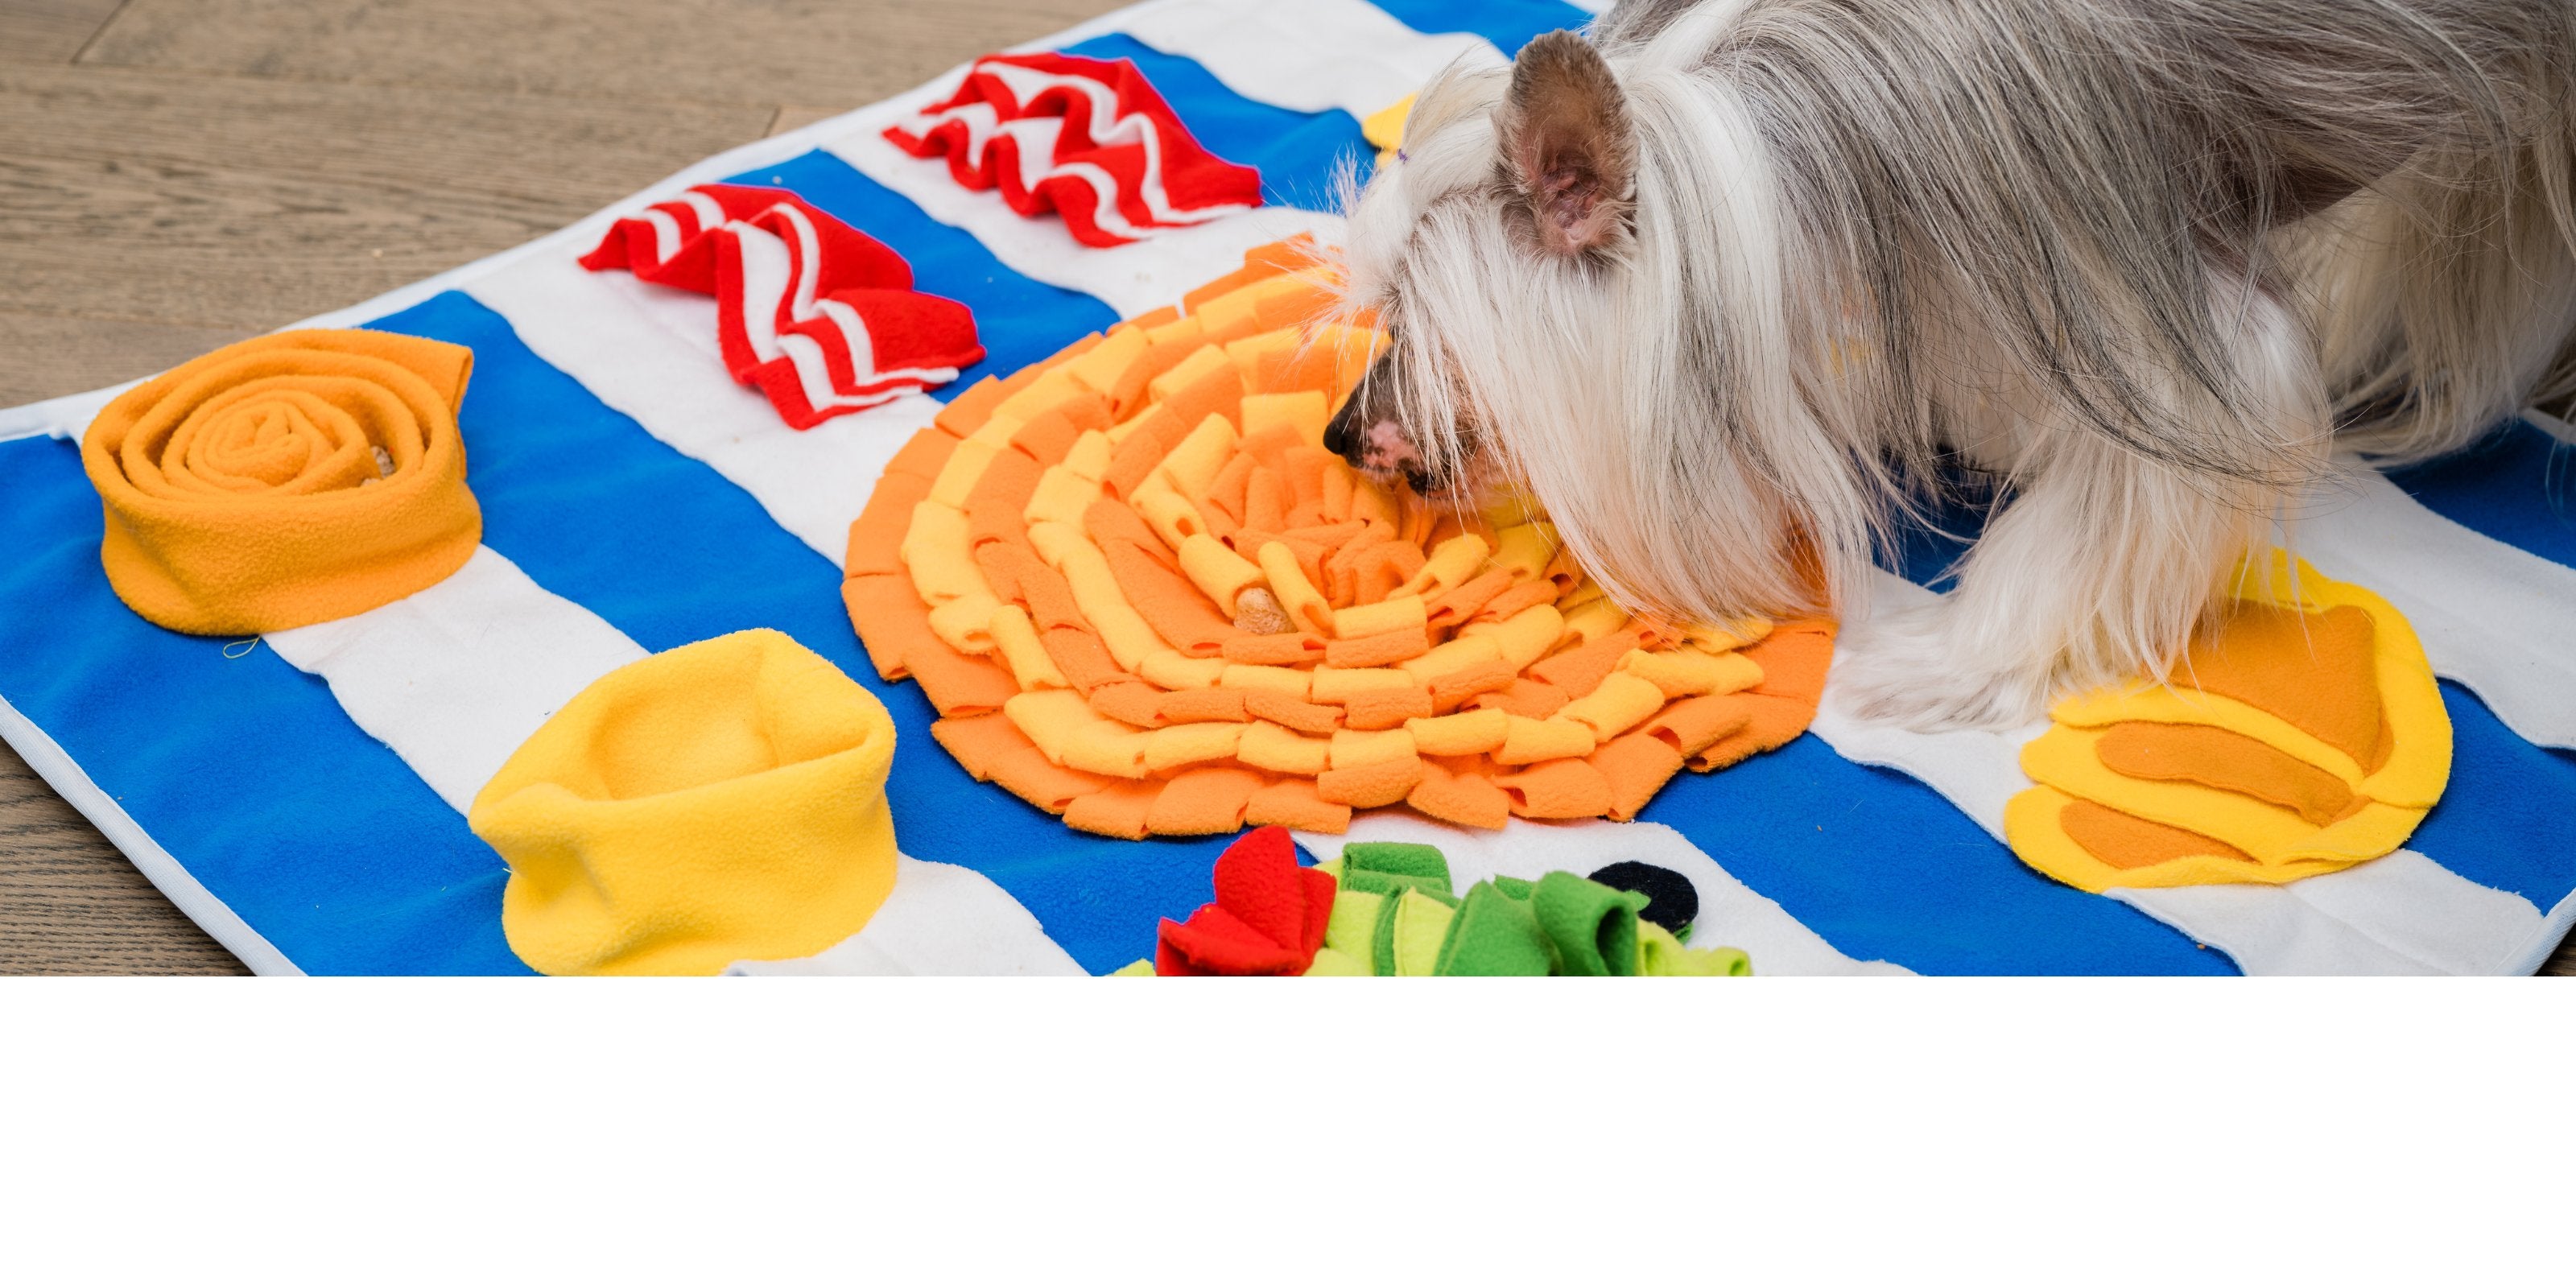 FunniPets Pet Snuffle Mat for Dogs